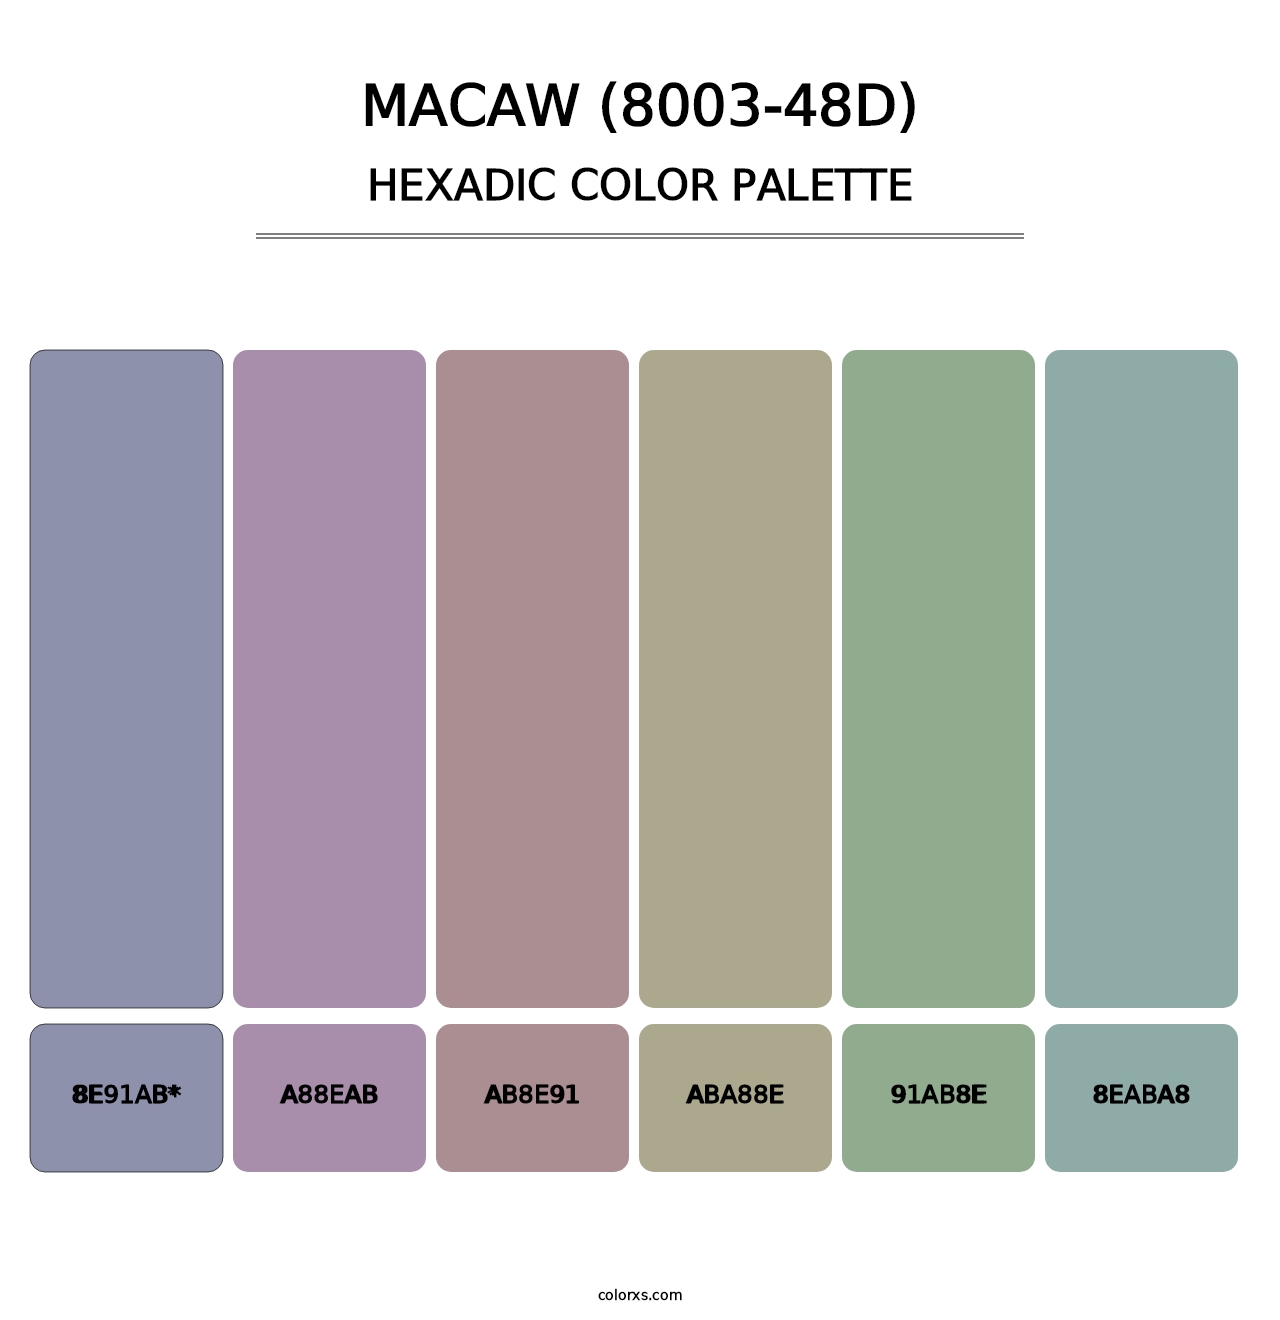 Macaw (8003-48D) - Hexadic Color Palette